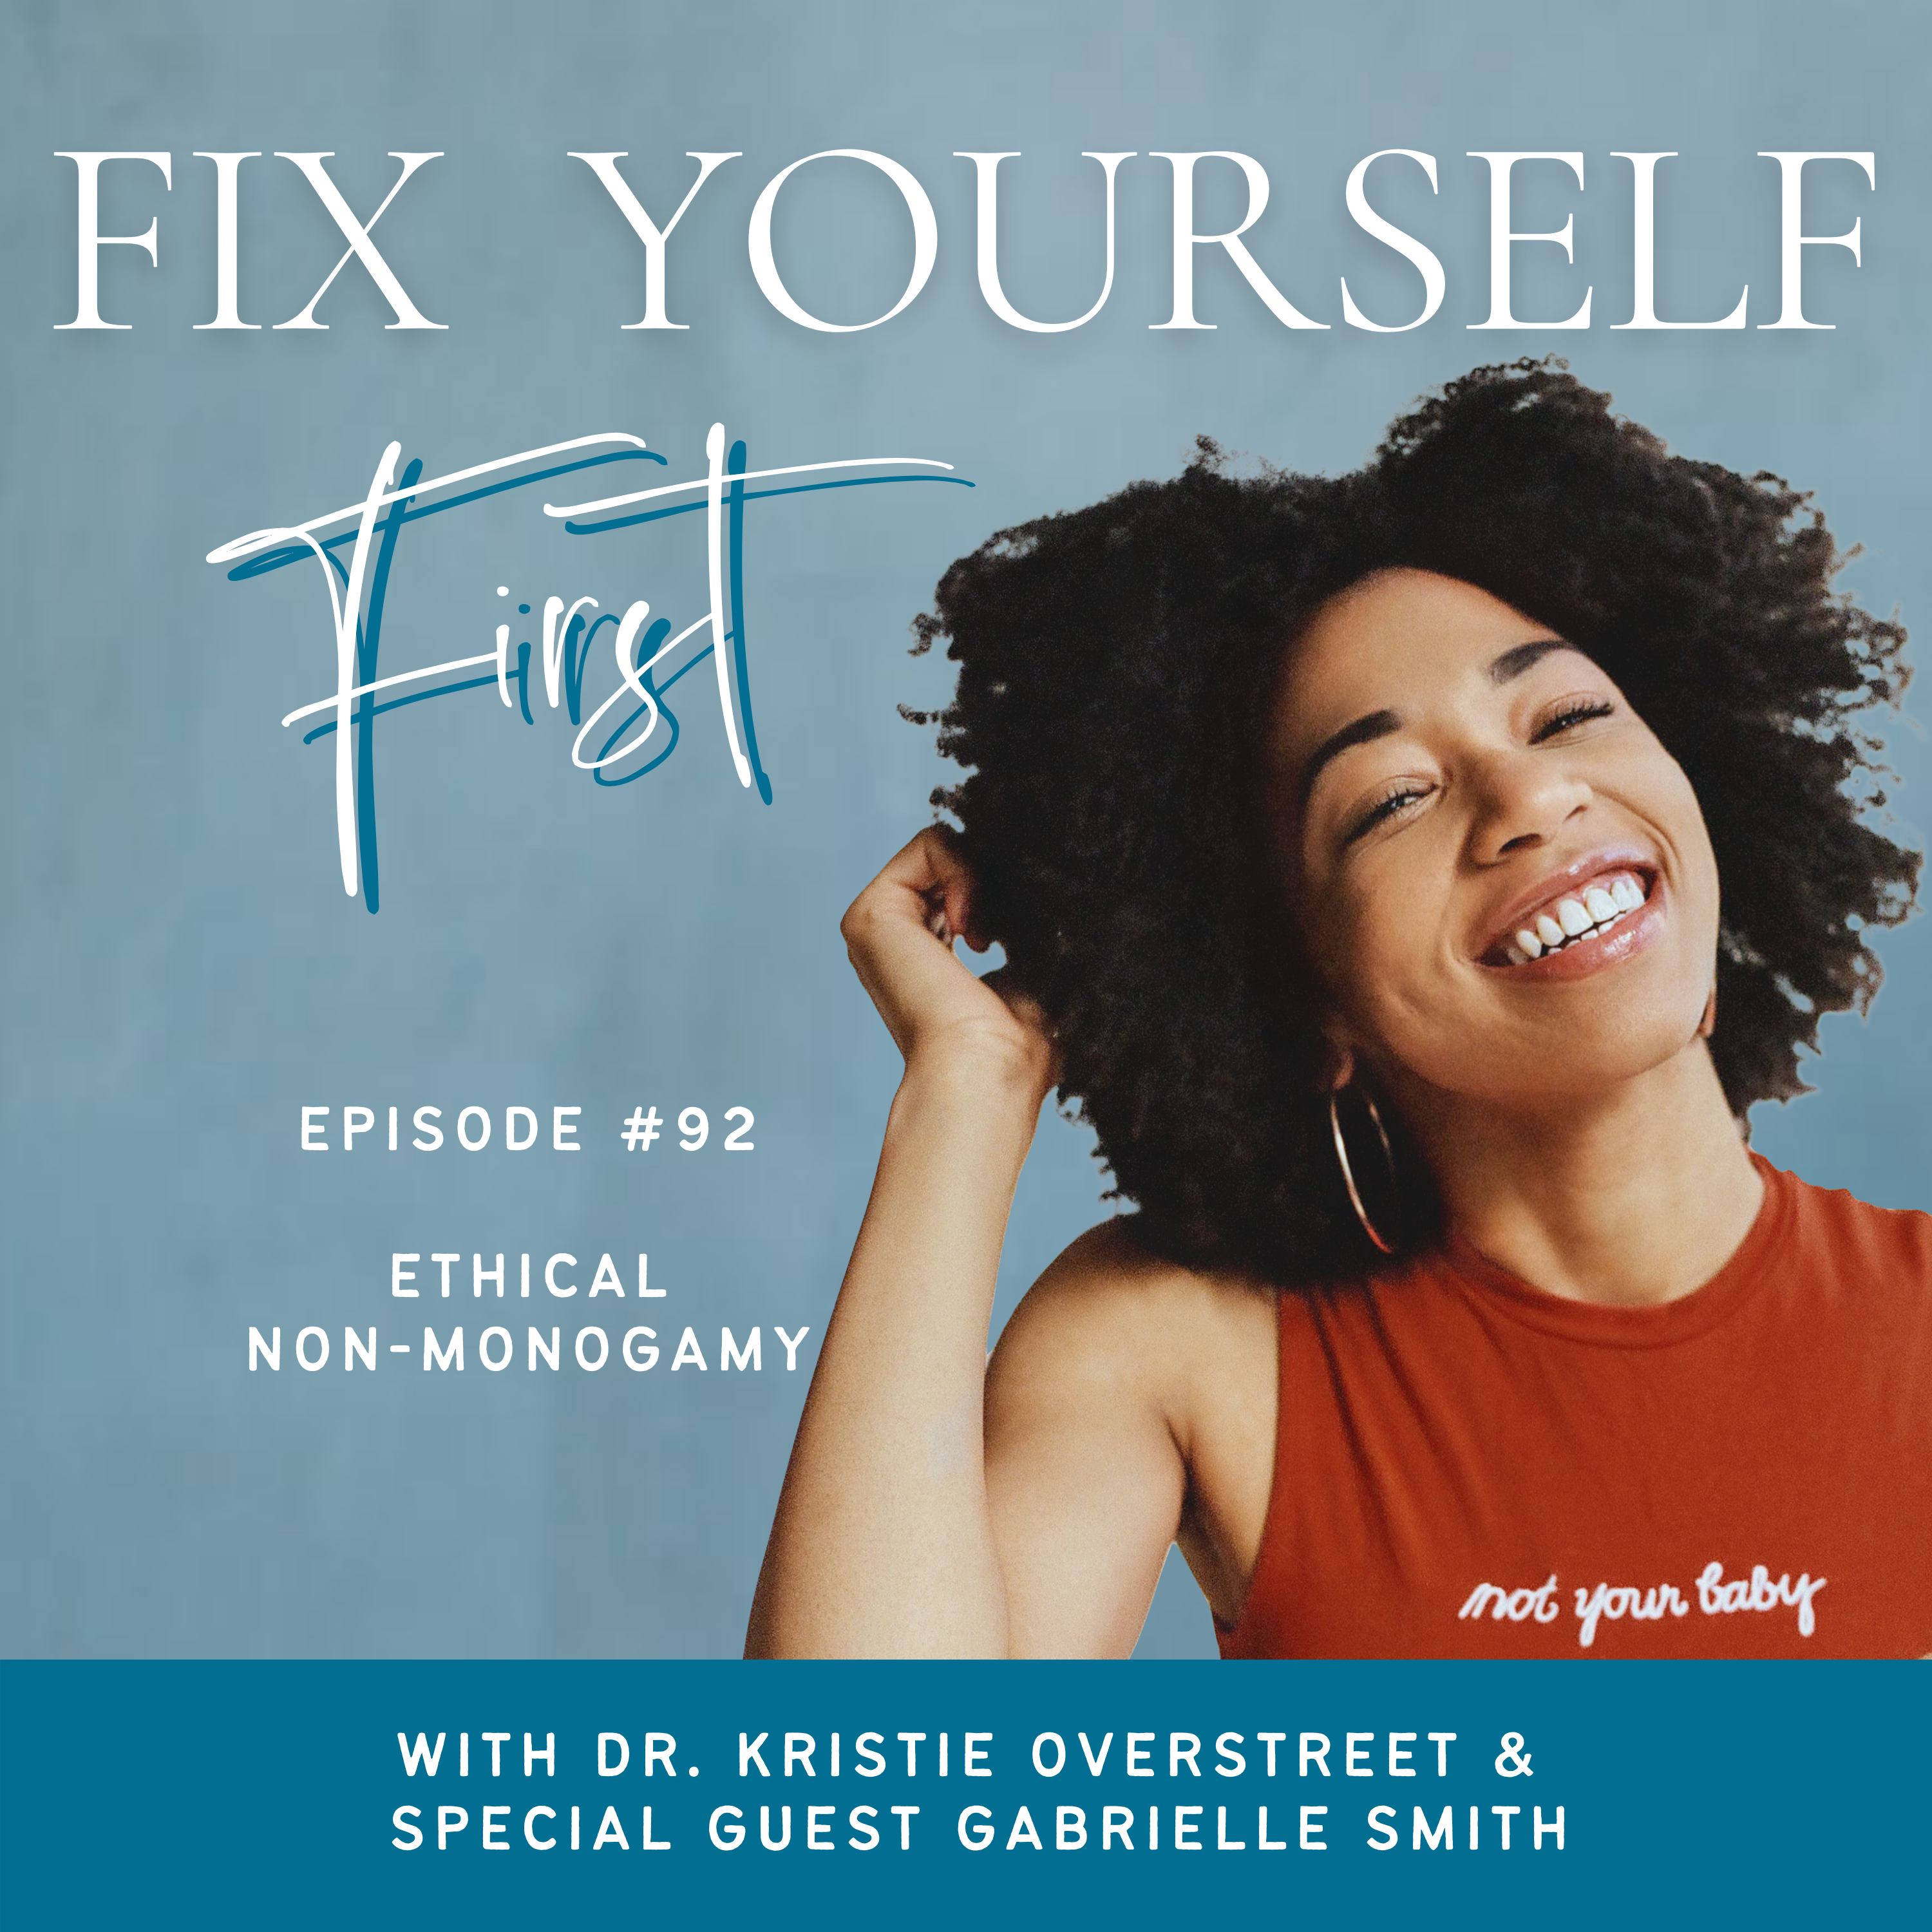 Fix Yourself First Episode 92 Ethical Non-Monogamy with Gabrielle Smith